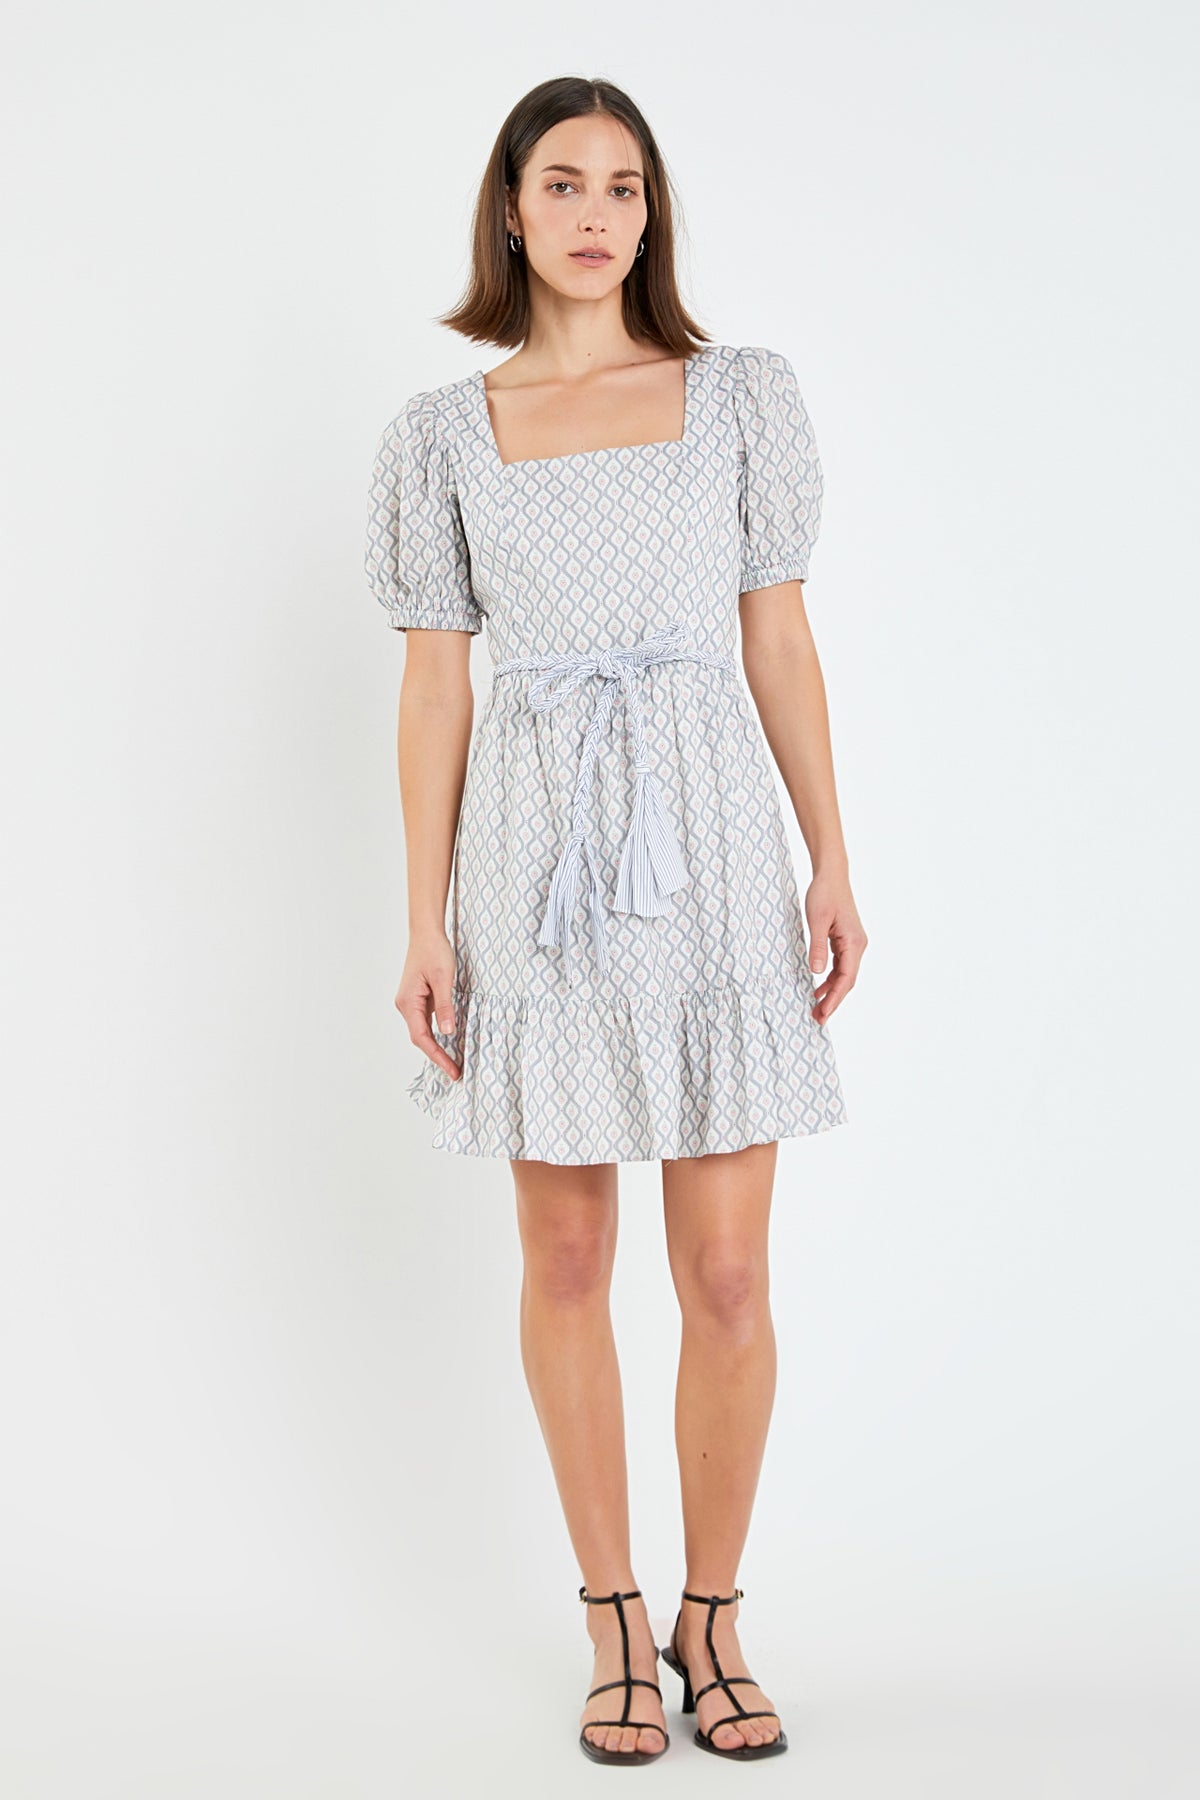 ENGLISH FACTORY - Floral Print Dress with Combo Braided Belt - DRESSES available at Objectrare